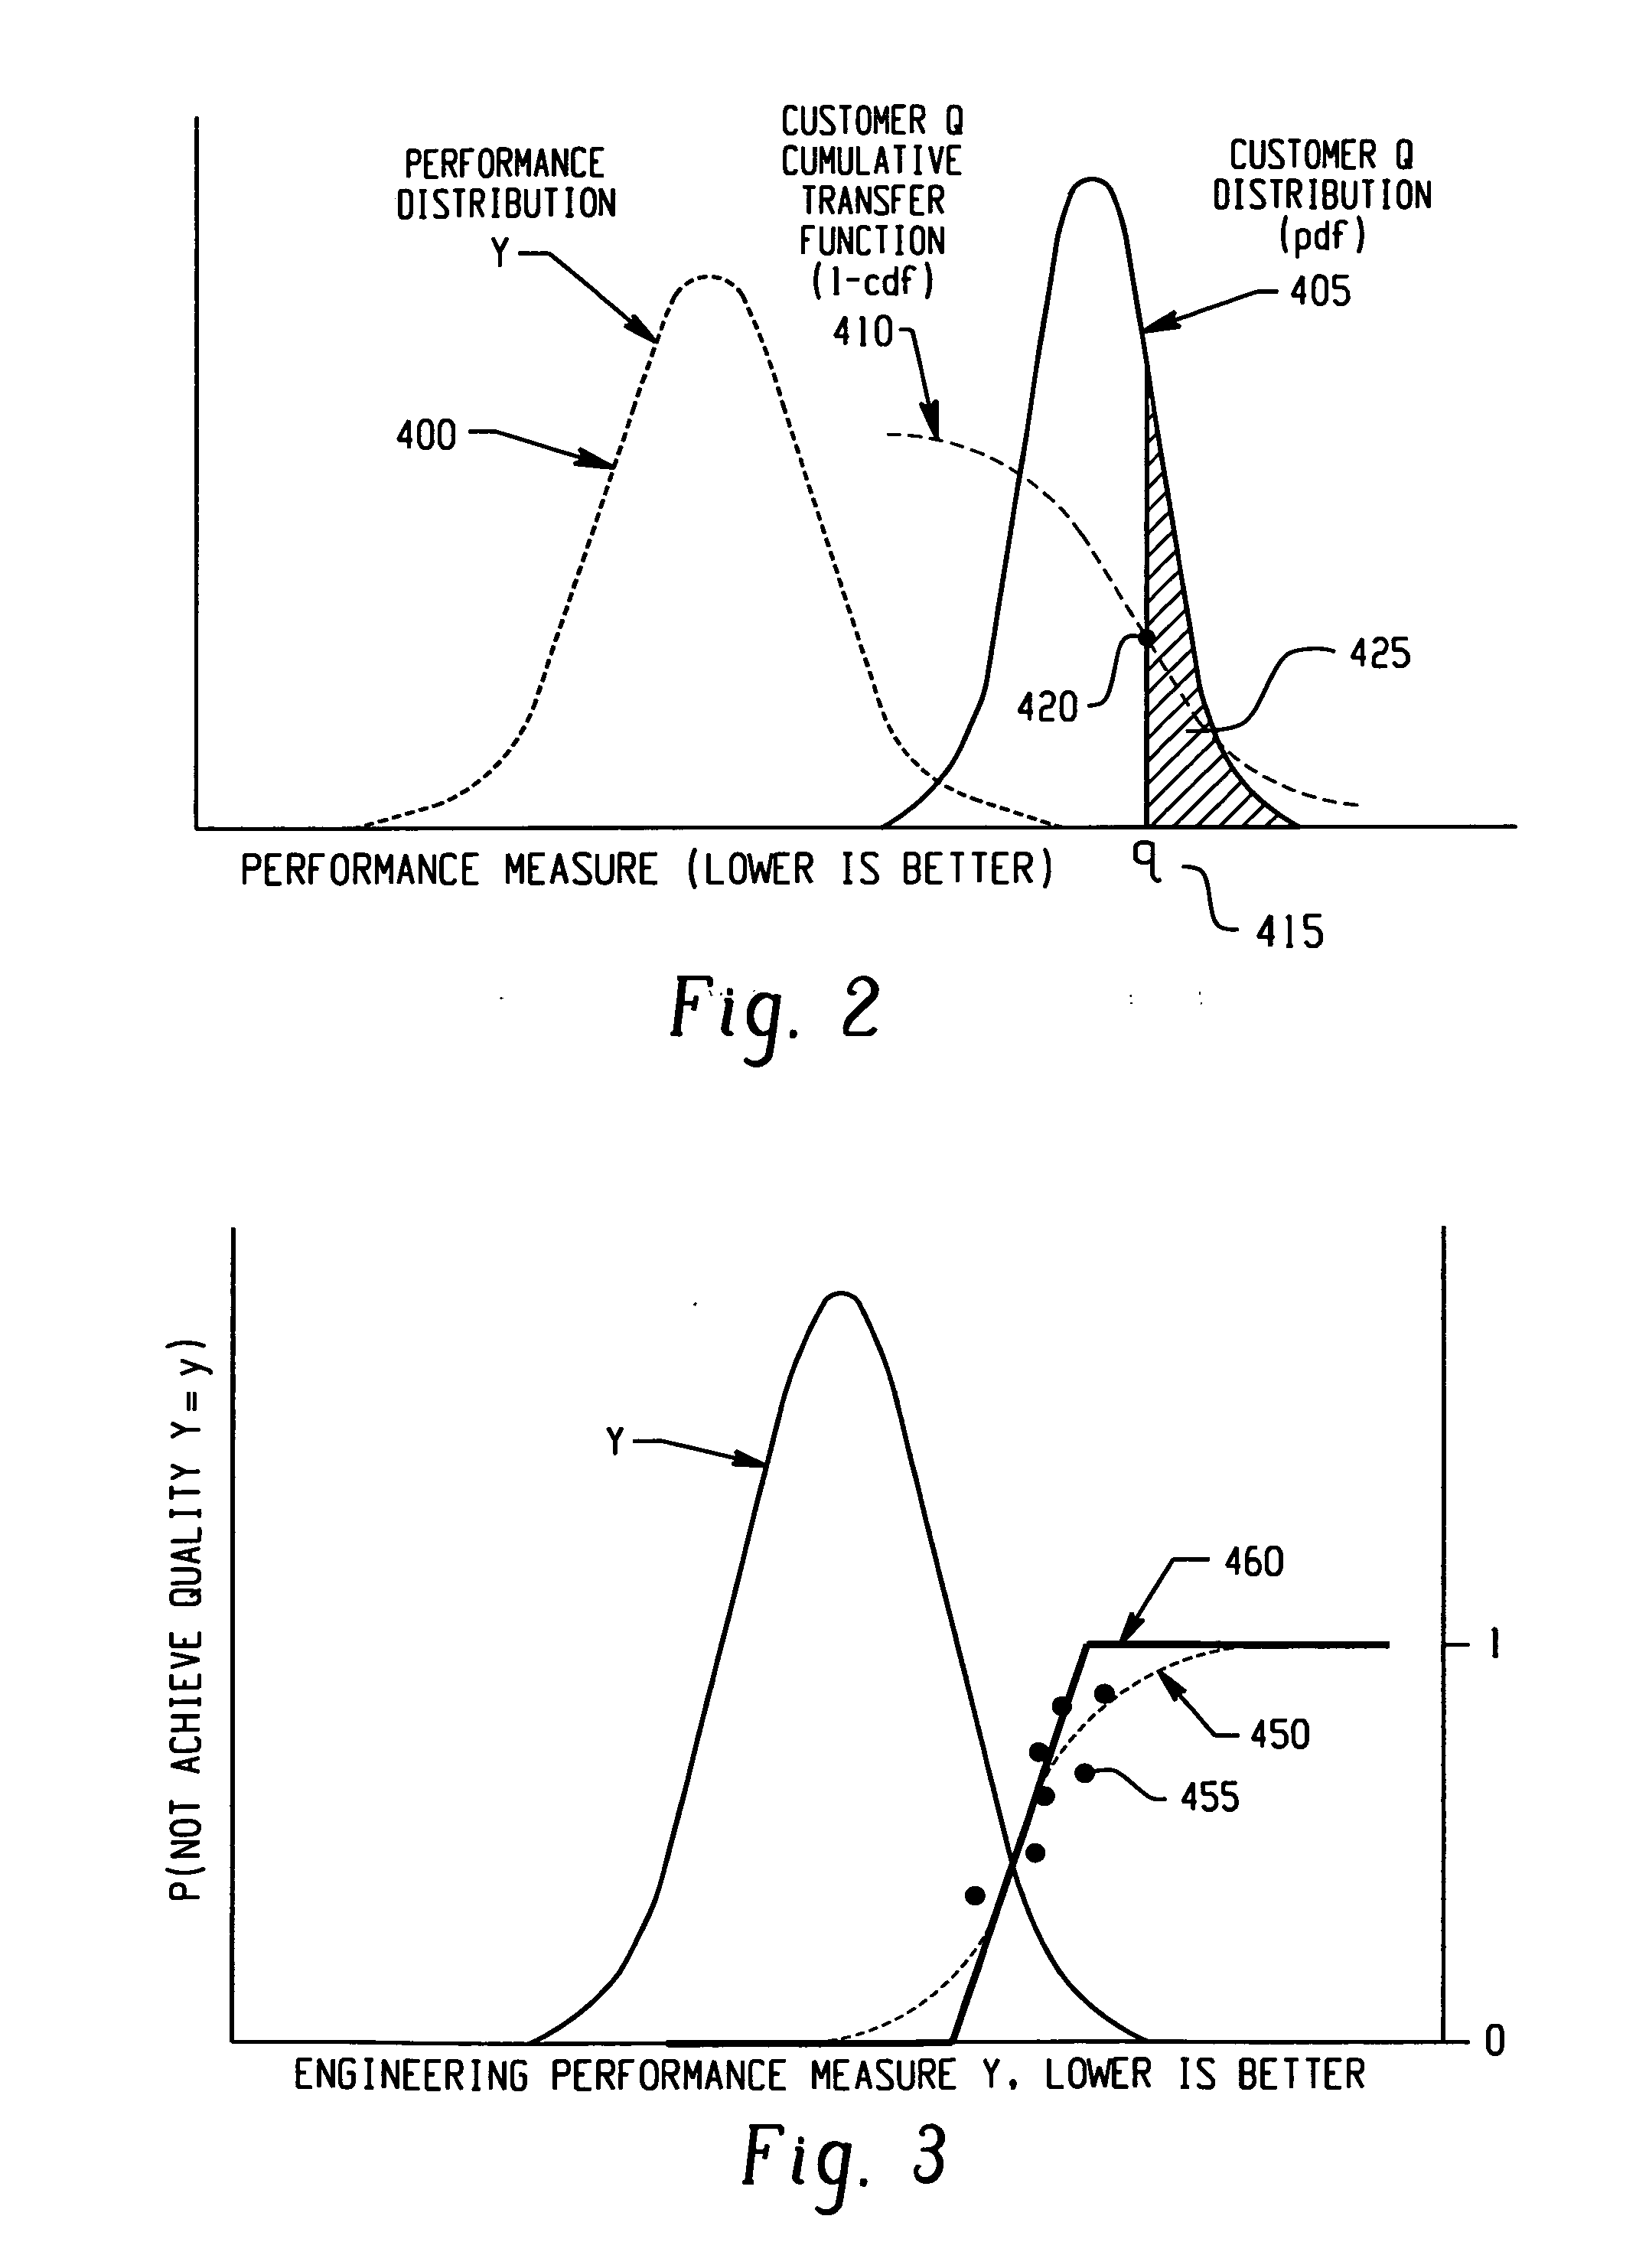 Method to determine process input variables' values that optimally balance customer based probability of achieving quality and costs for multiple competing attributes